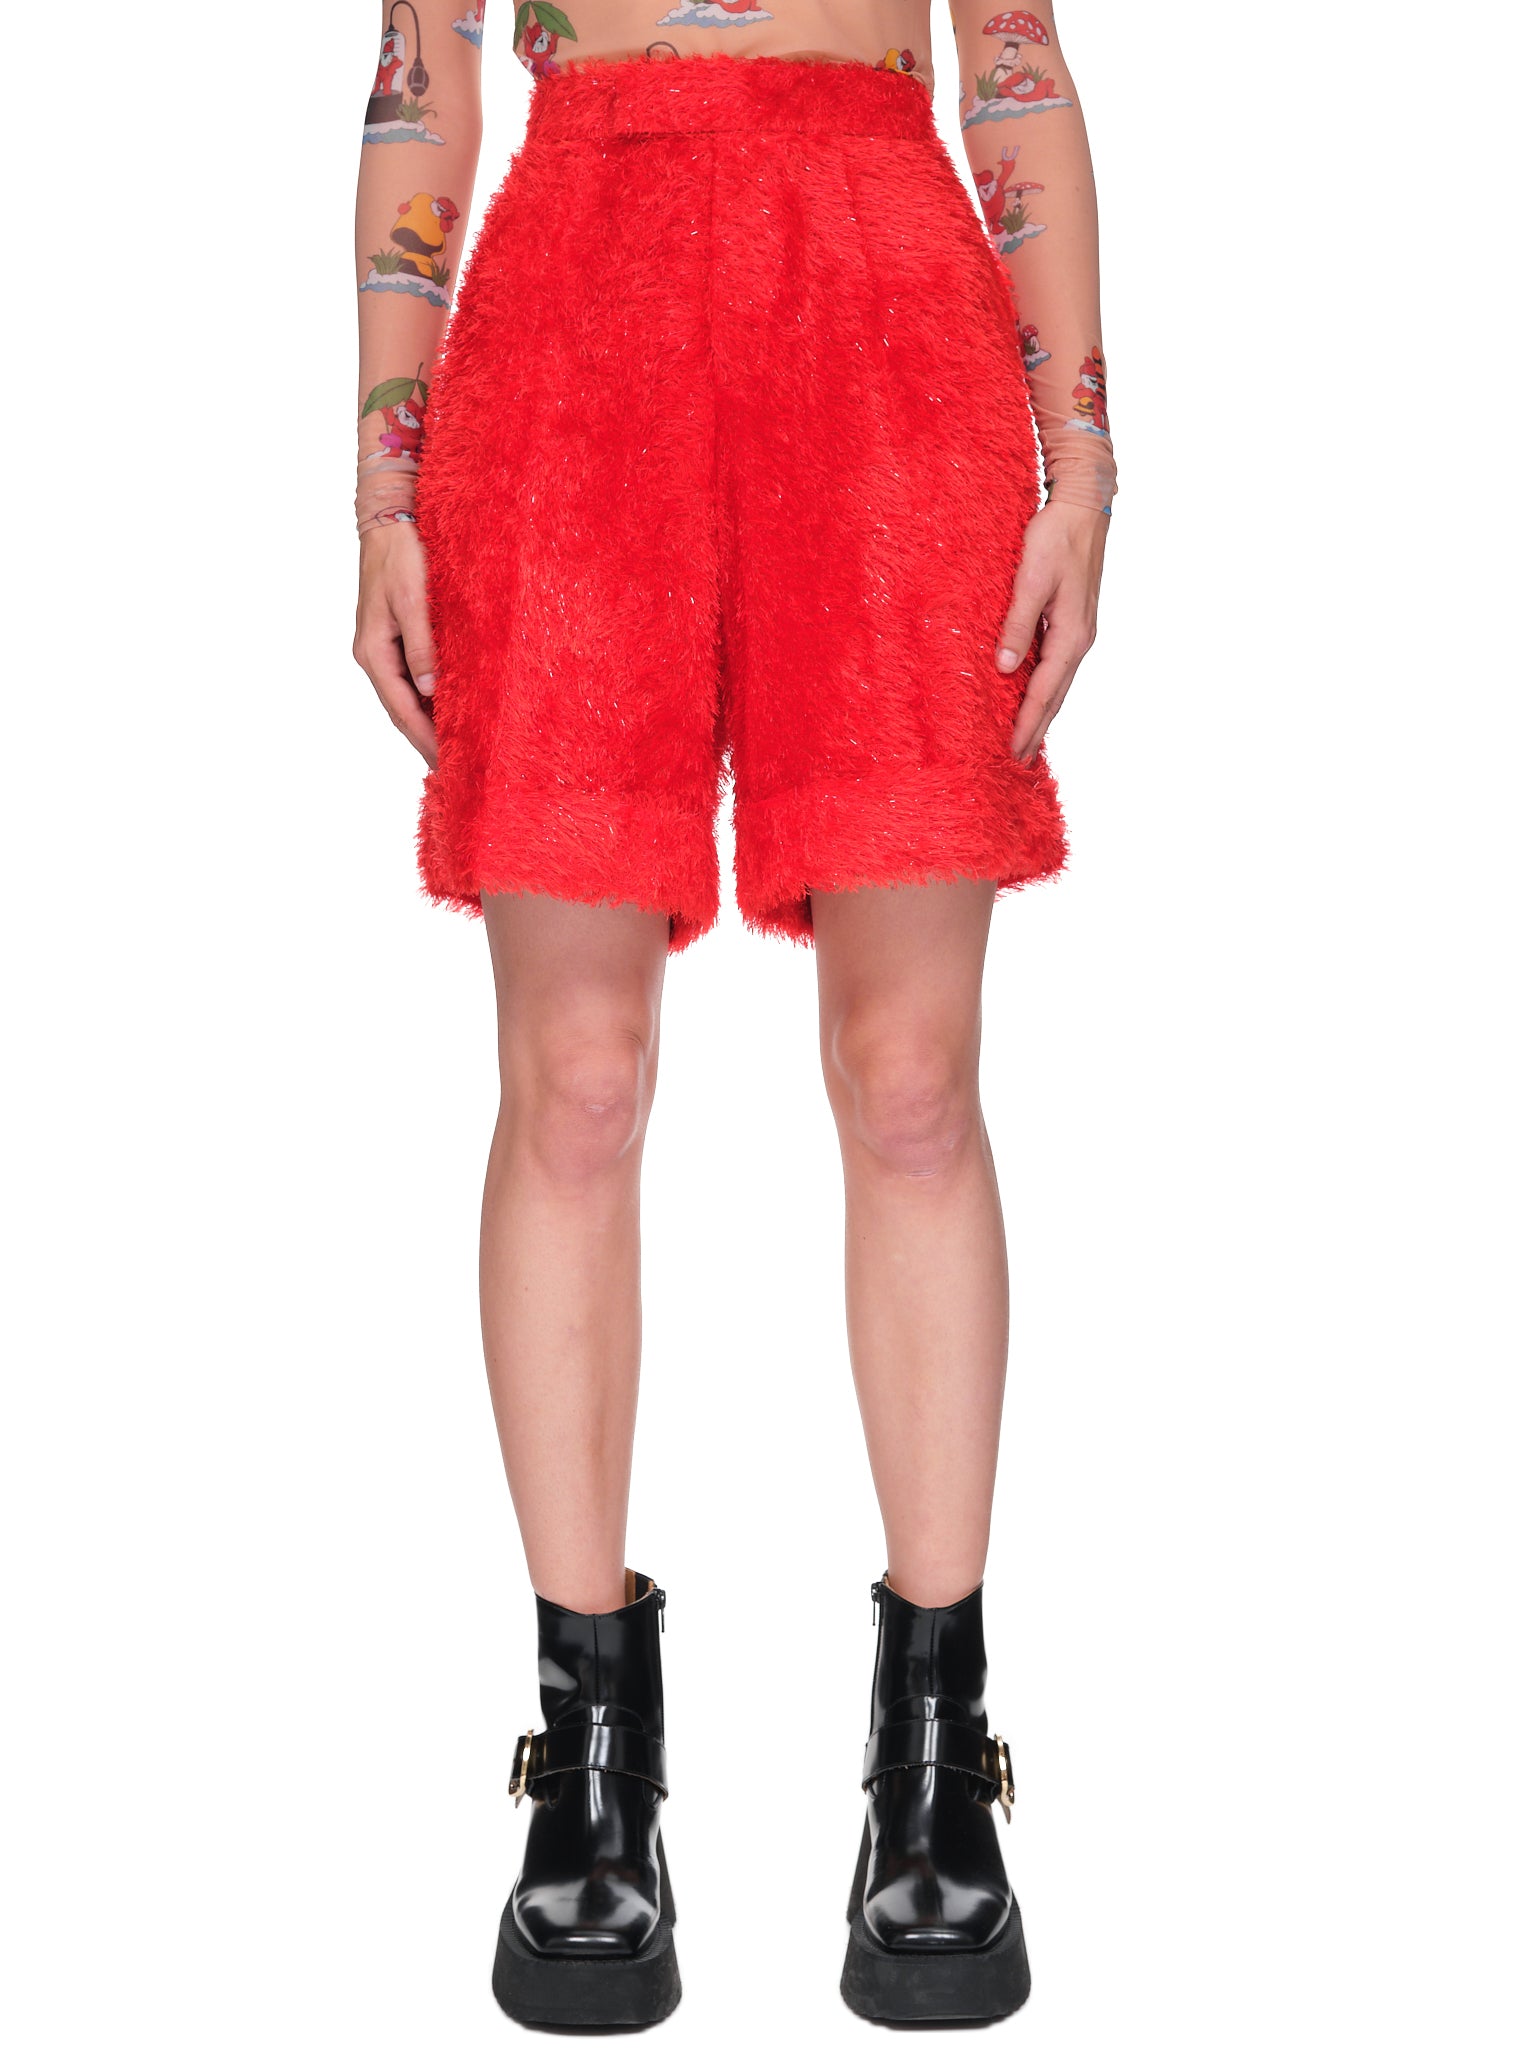 Fuzzy Shorts (UC1B1503-RED)